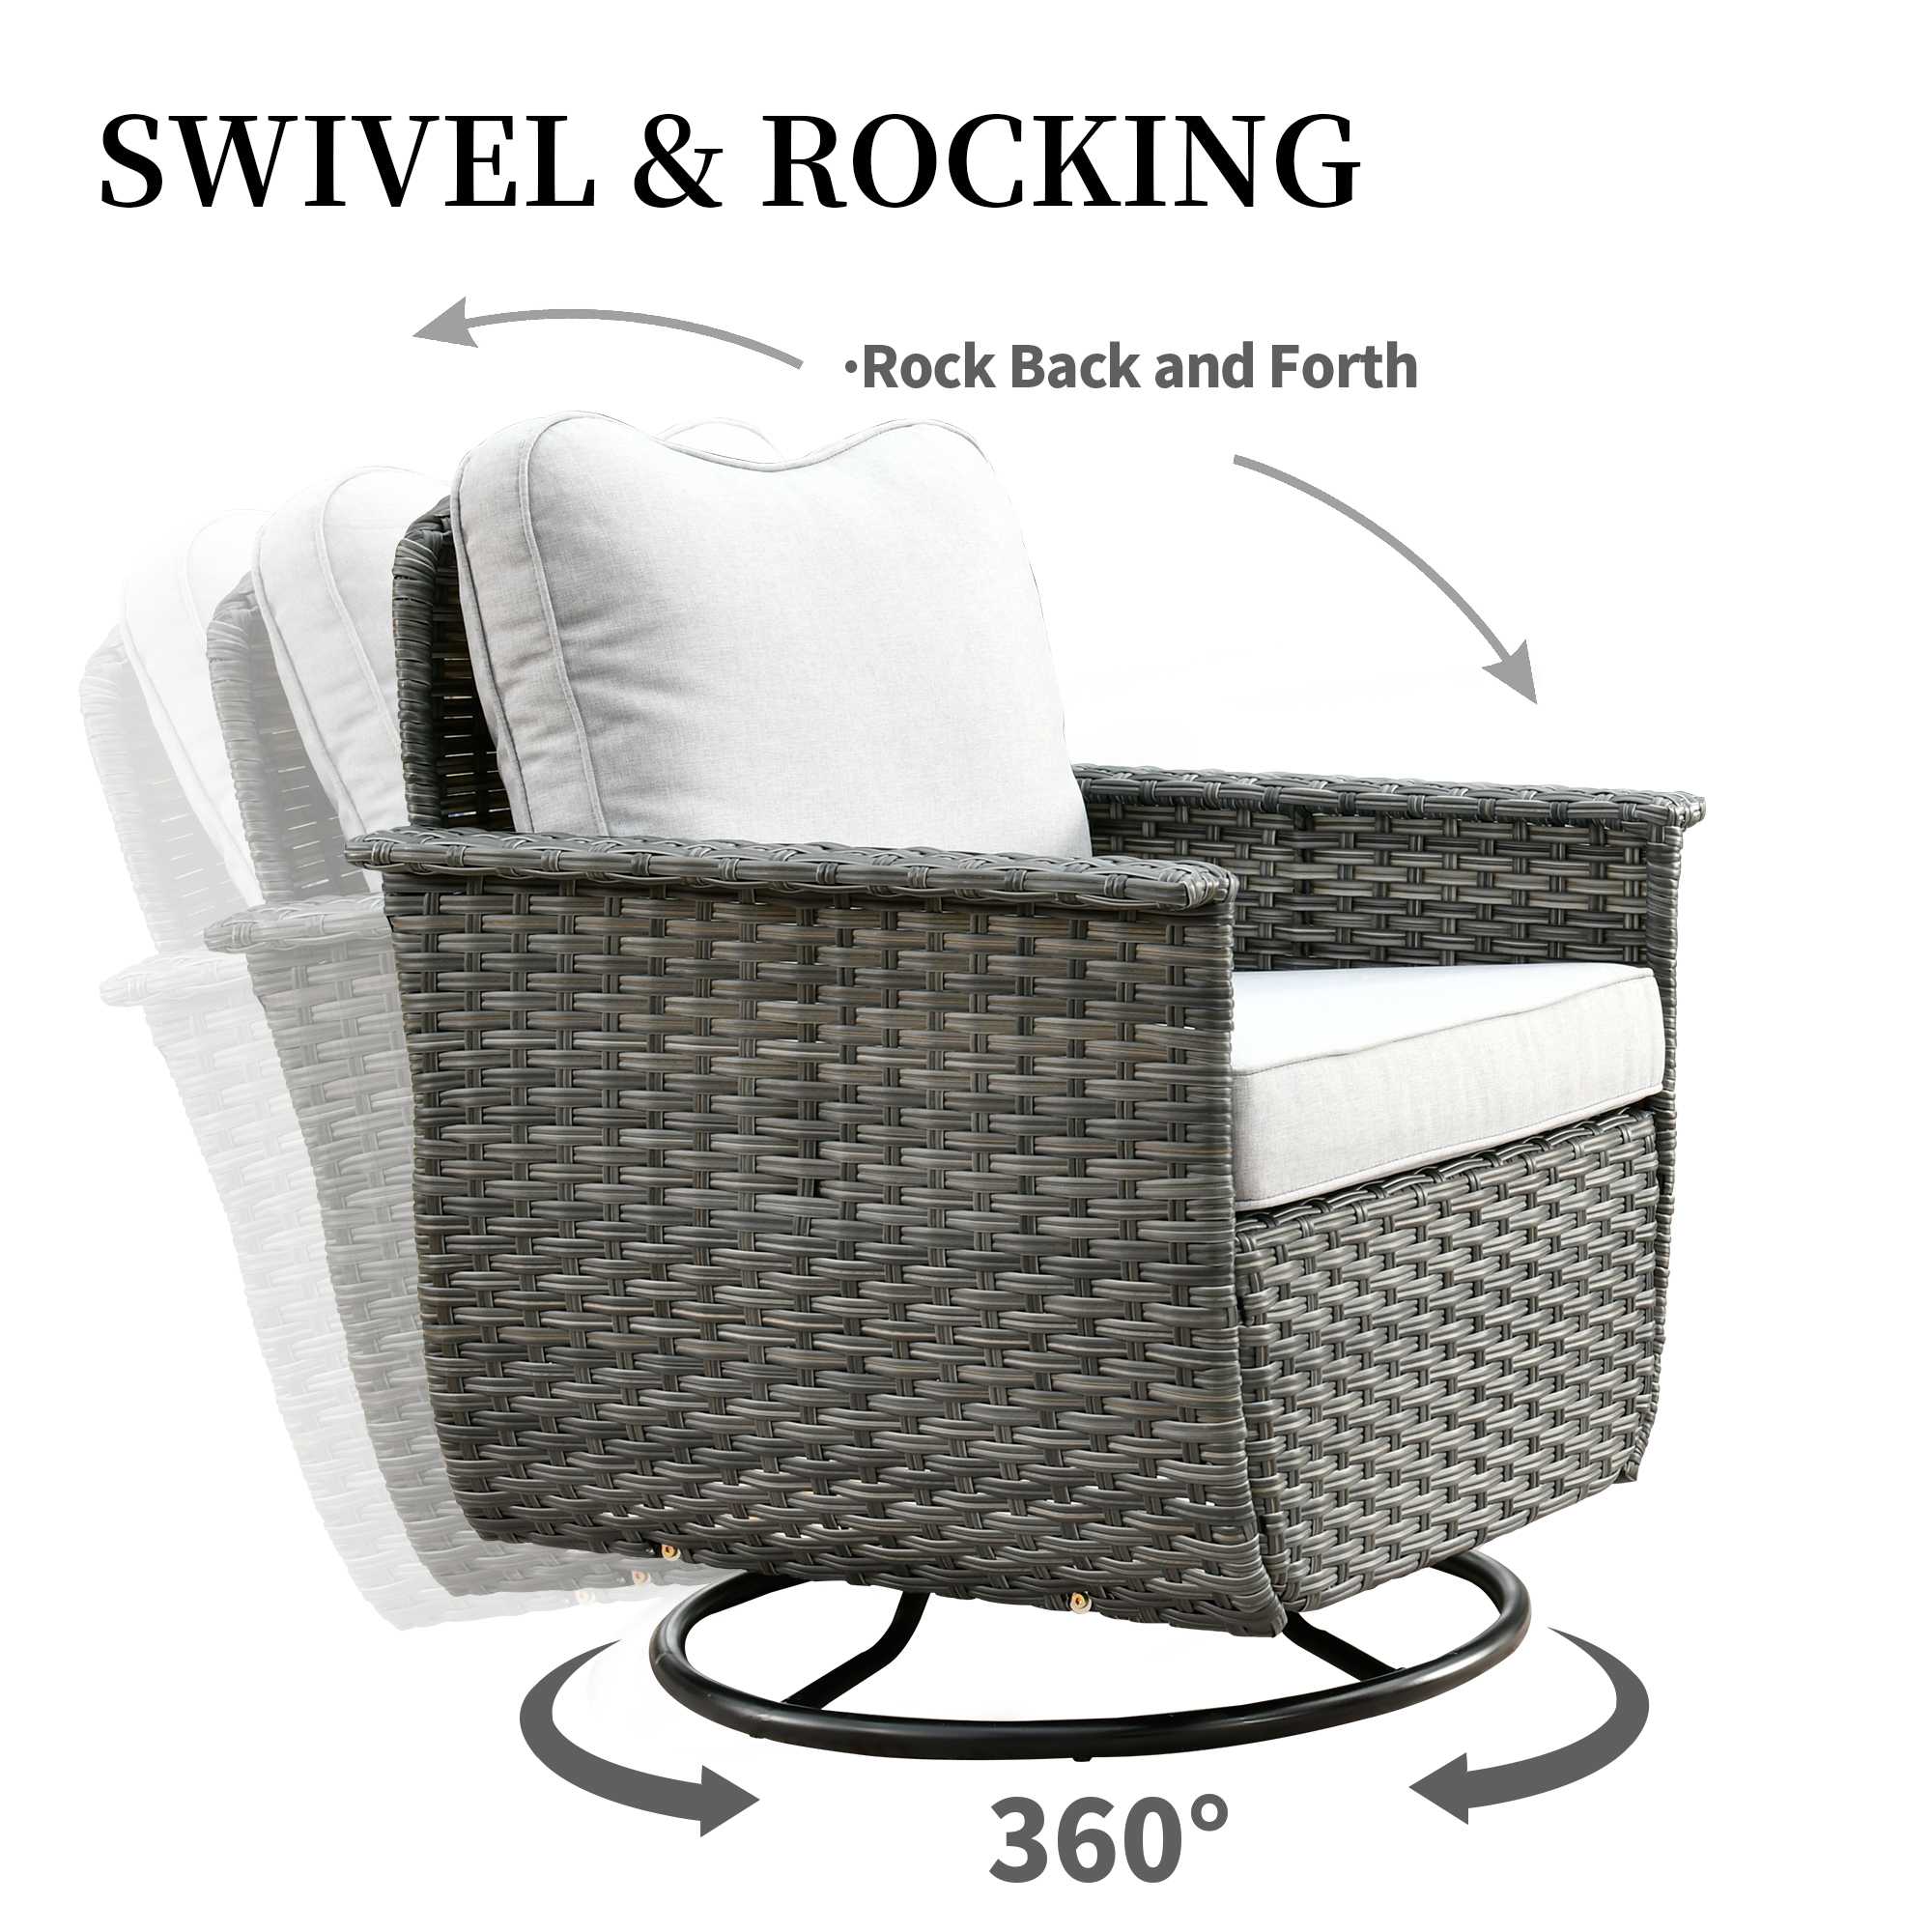 Ovios Rocking Chair Dark Grey Wicker Outdoor Table and Chairs matching Pet Sofa Series